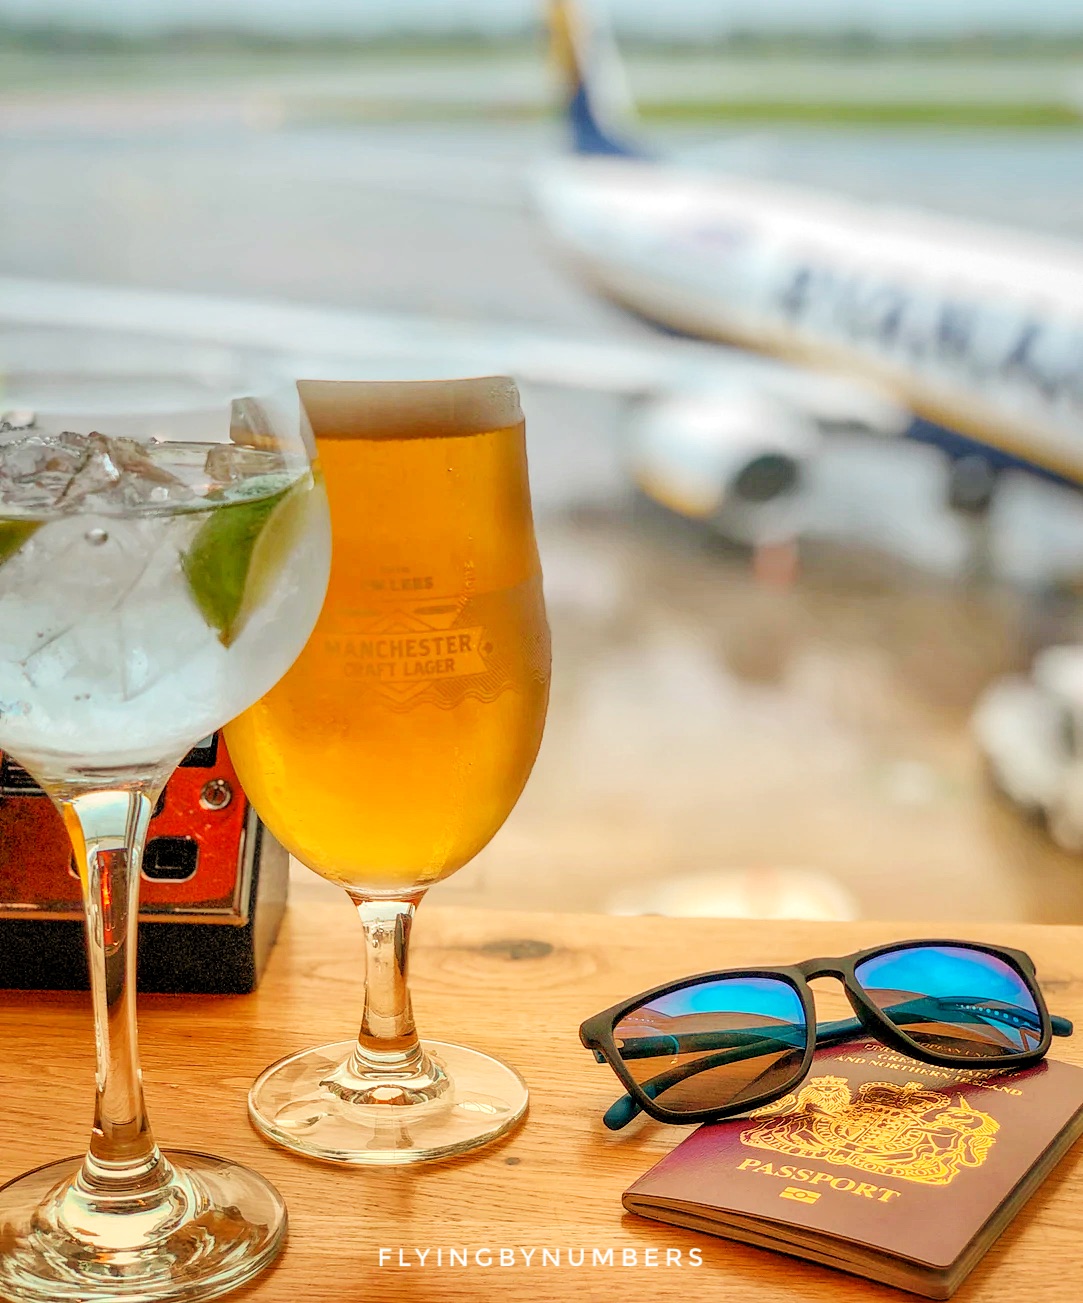 Passport glasses and alcoholic drinks in front of commercial plane